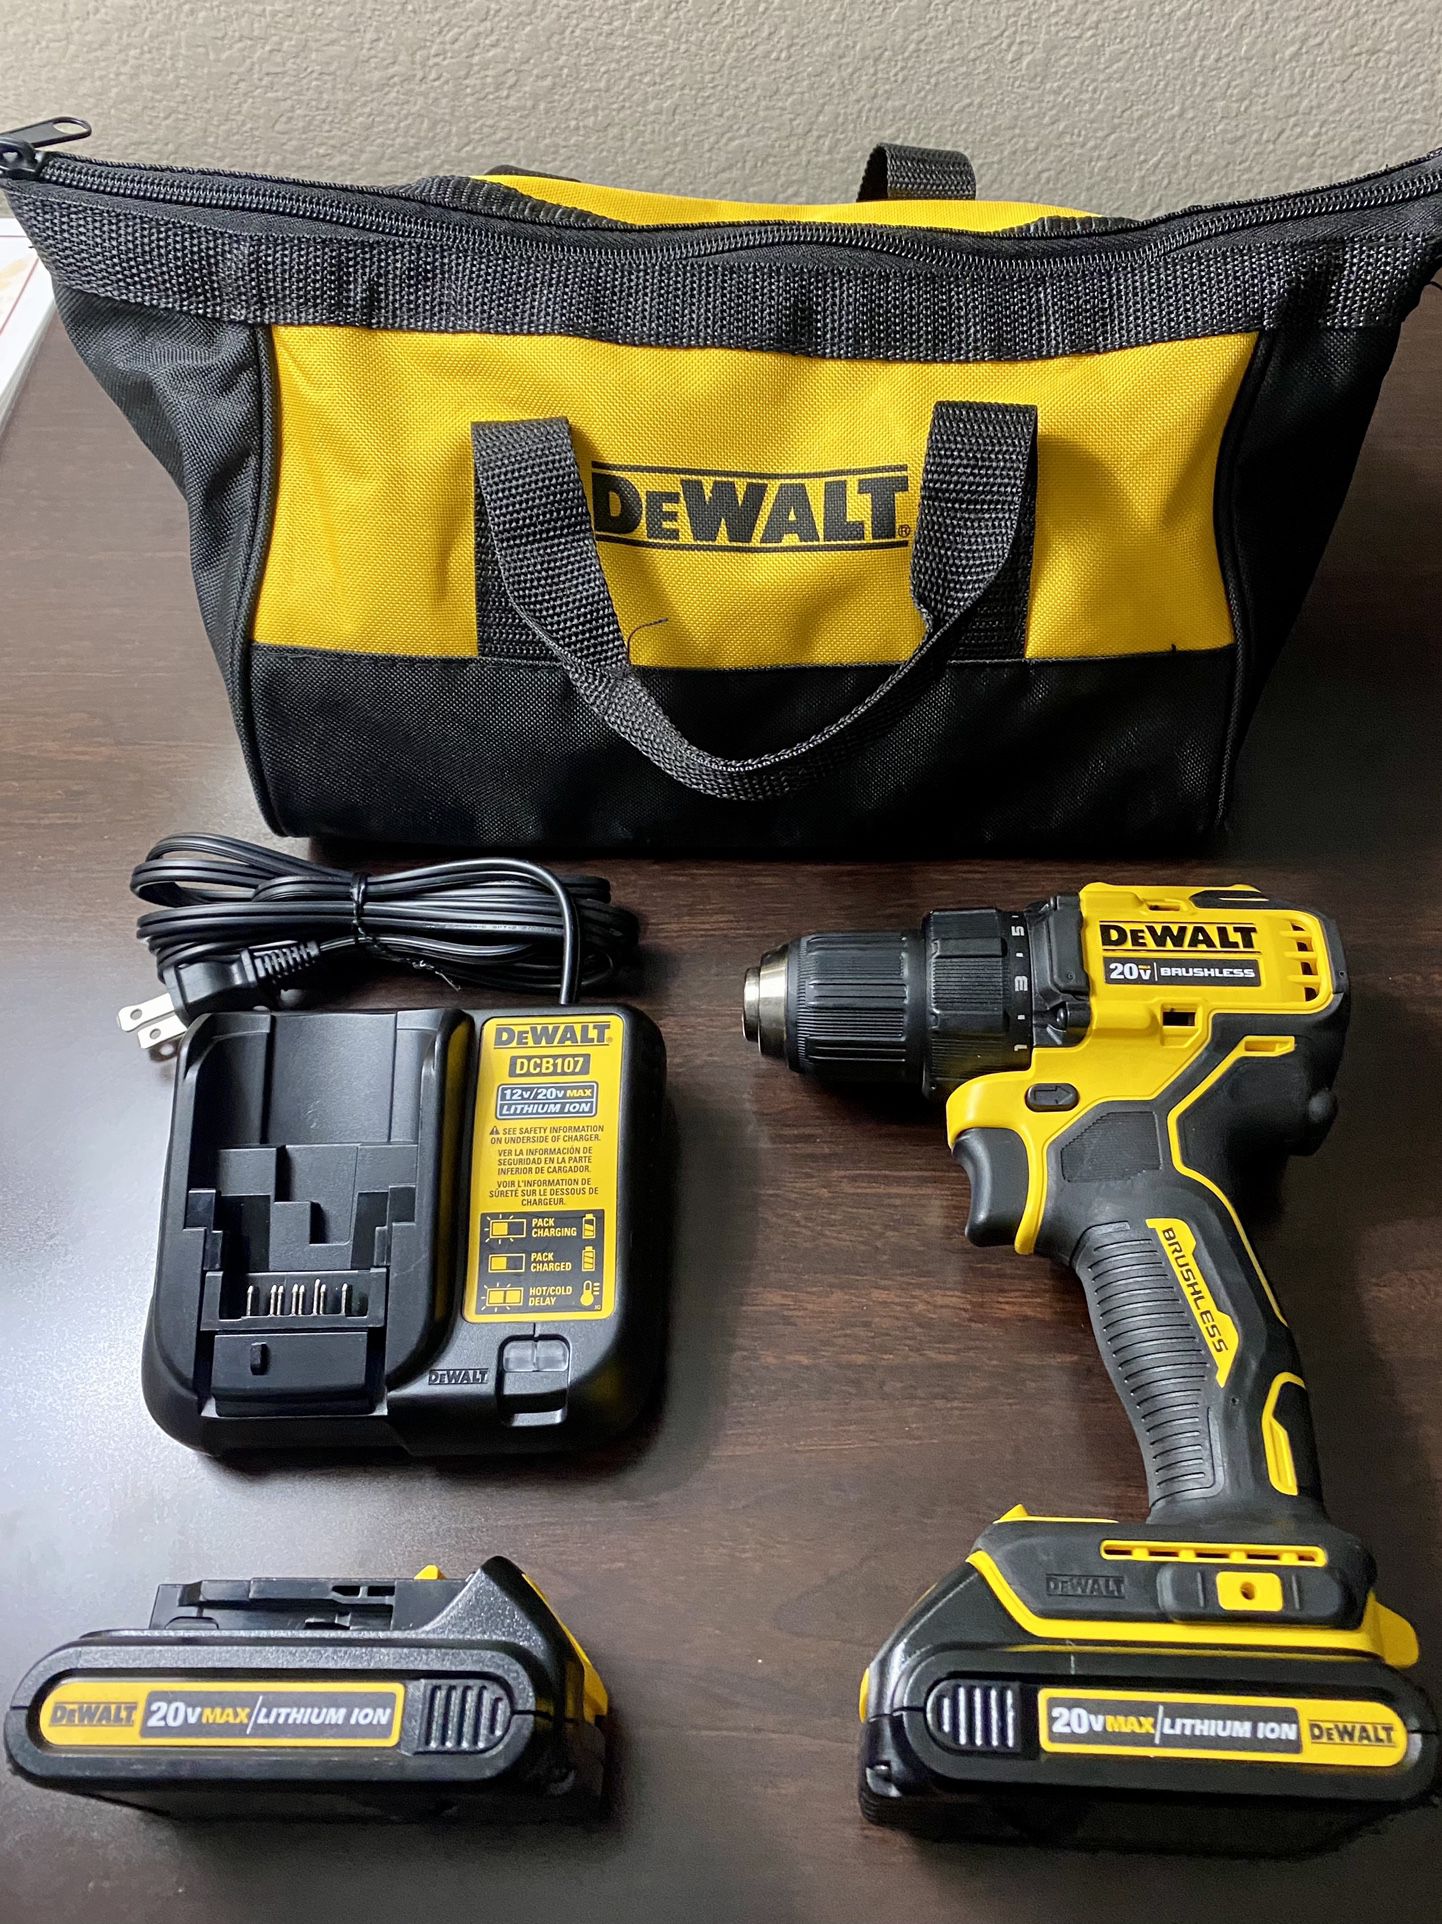 NEW Dewalt Atomic 20V MAX with Extra Battery And Charger.  Never Used!  